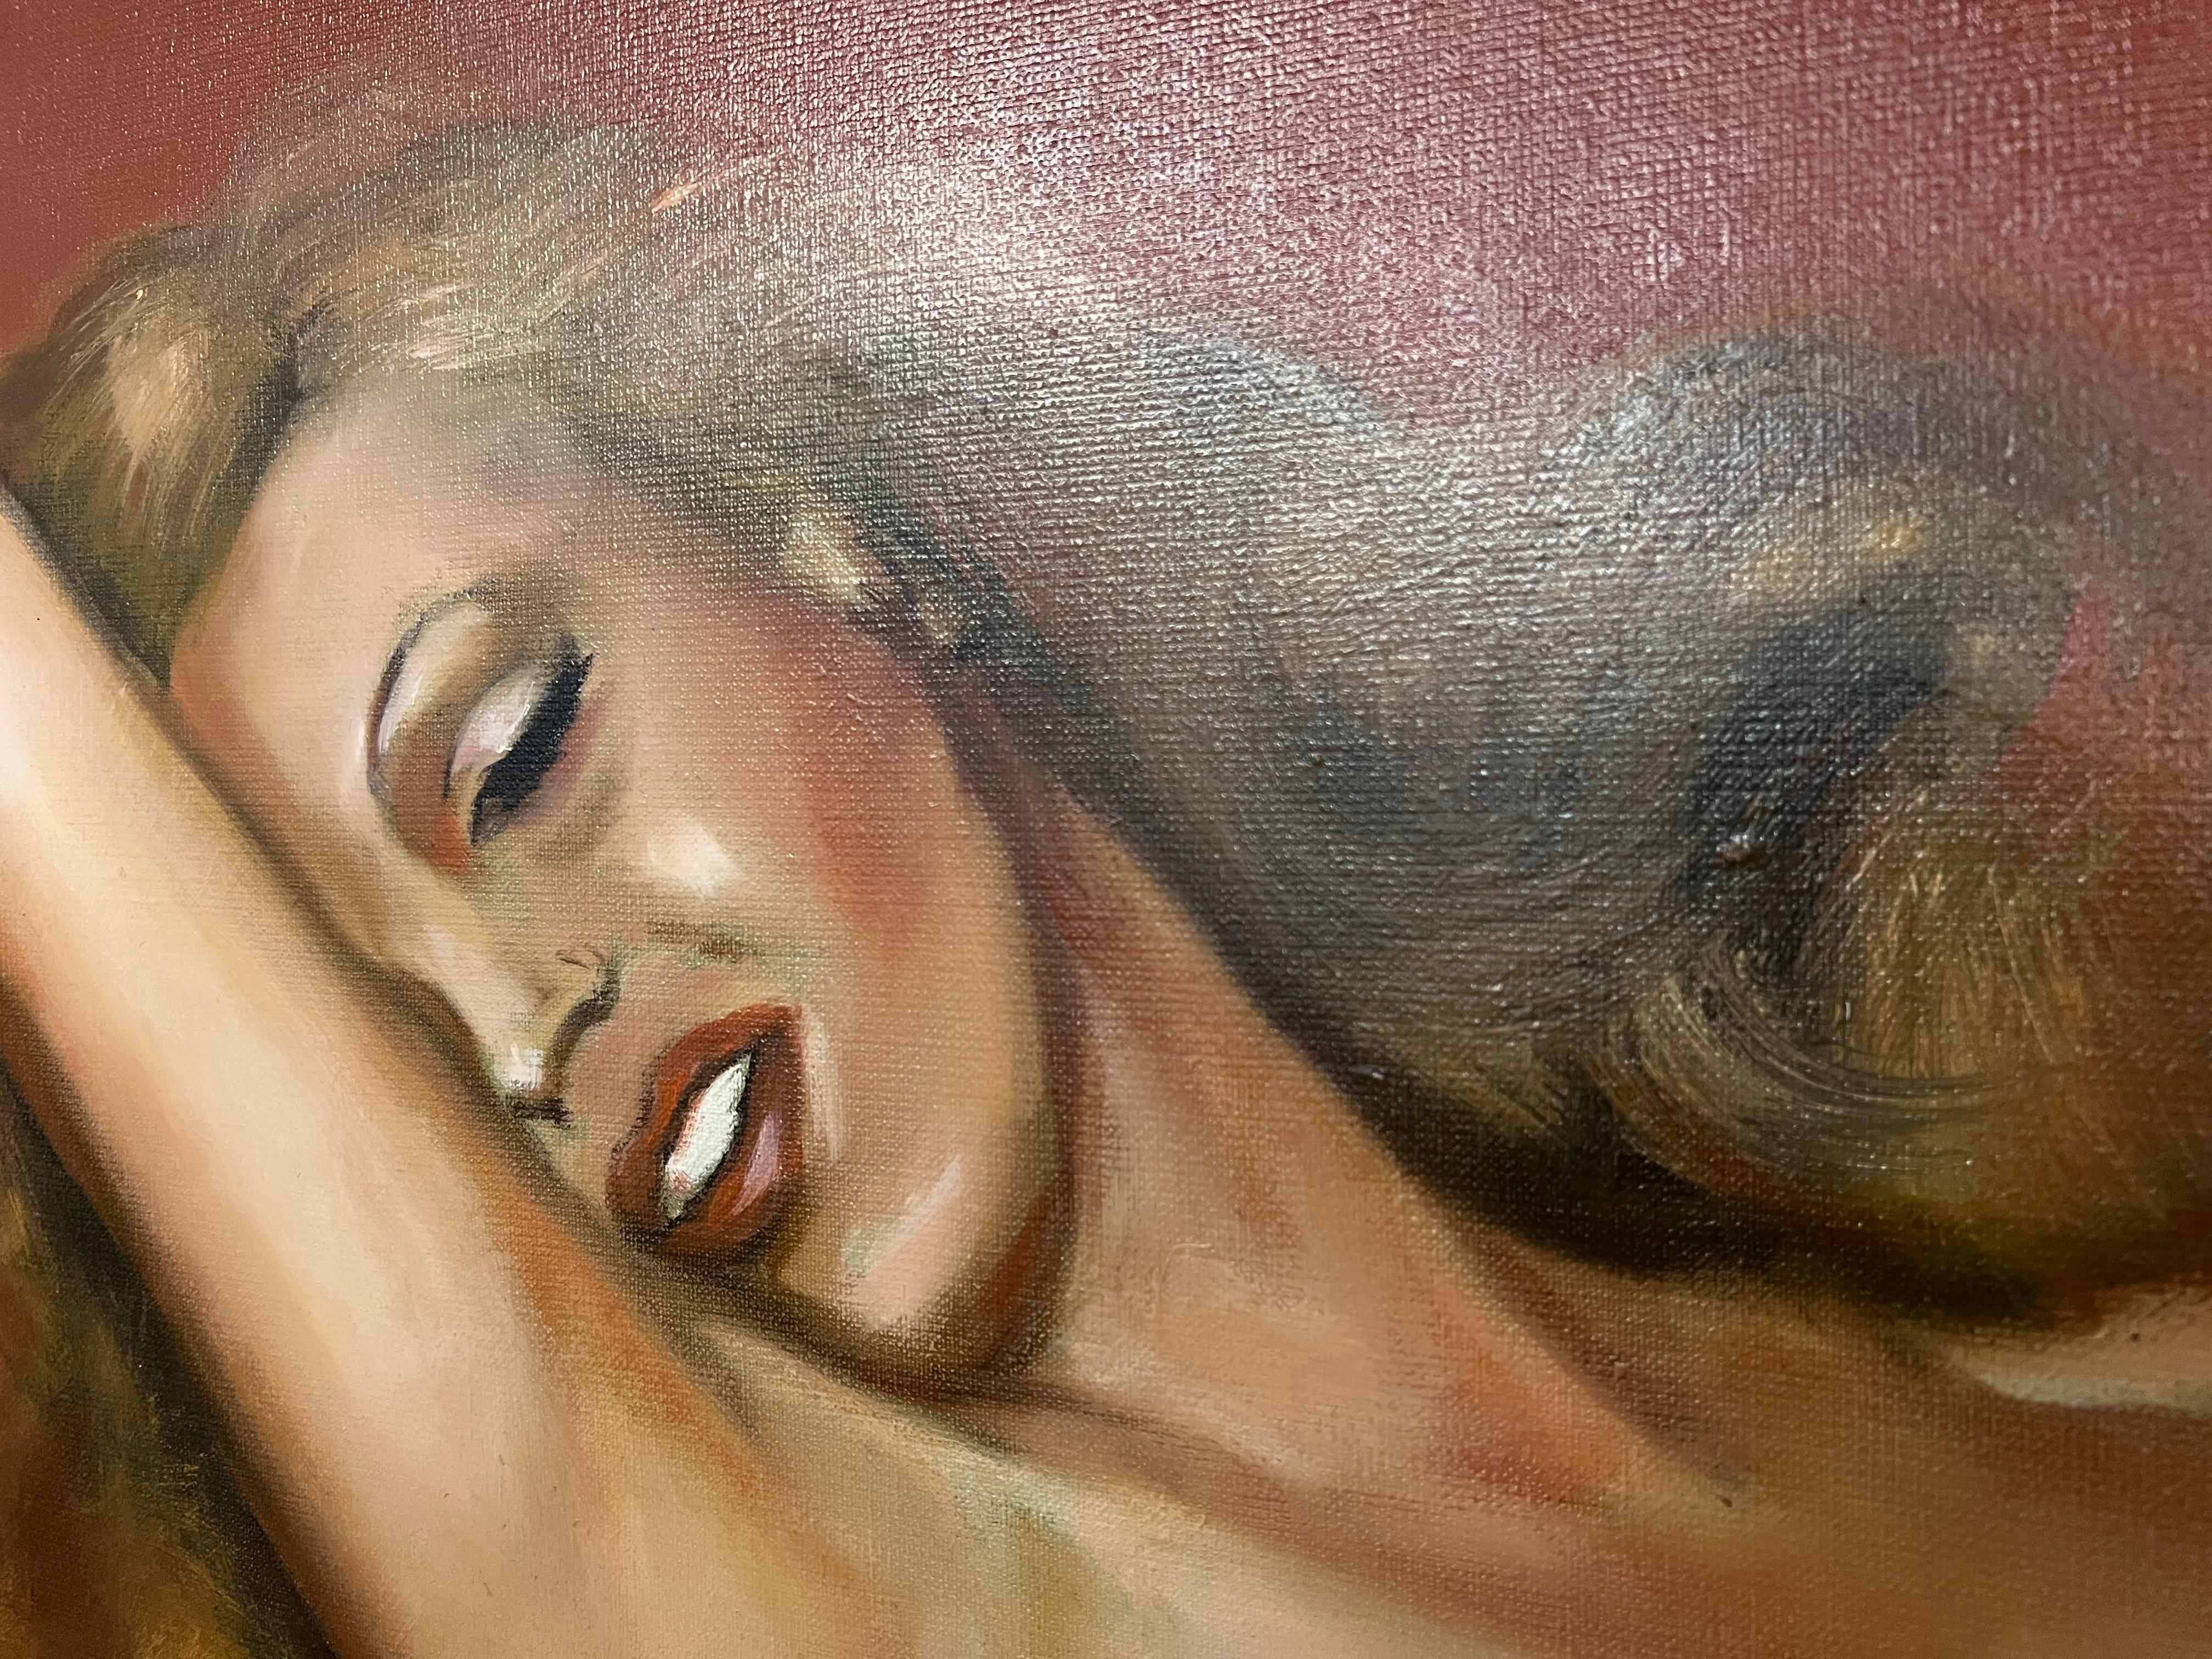 Canvas Marilyn Monroe Pin Up Painting inspired by Tom Kelley's Playboy Photo